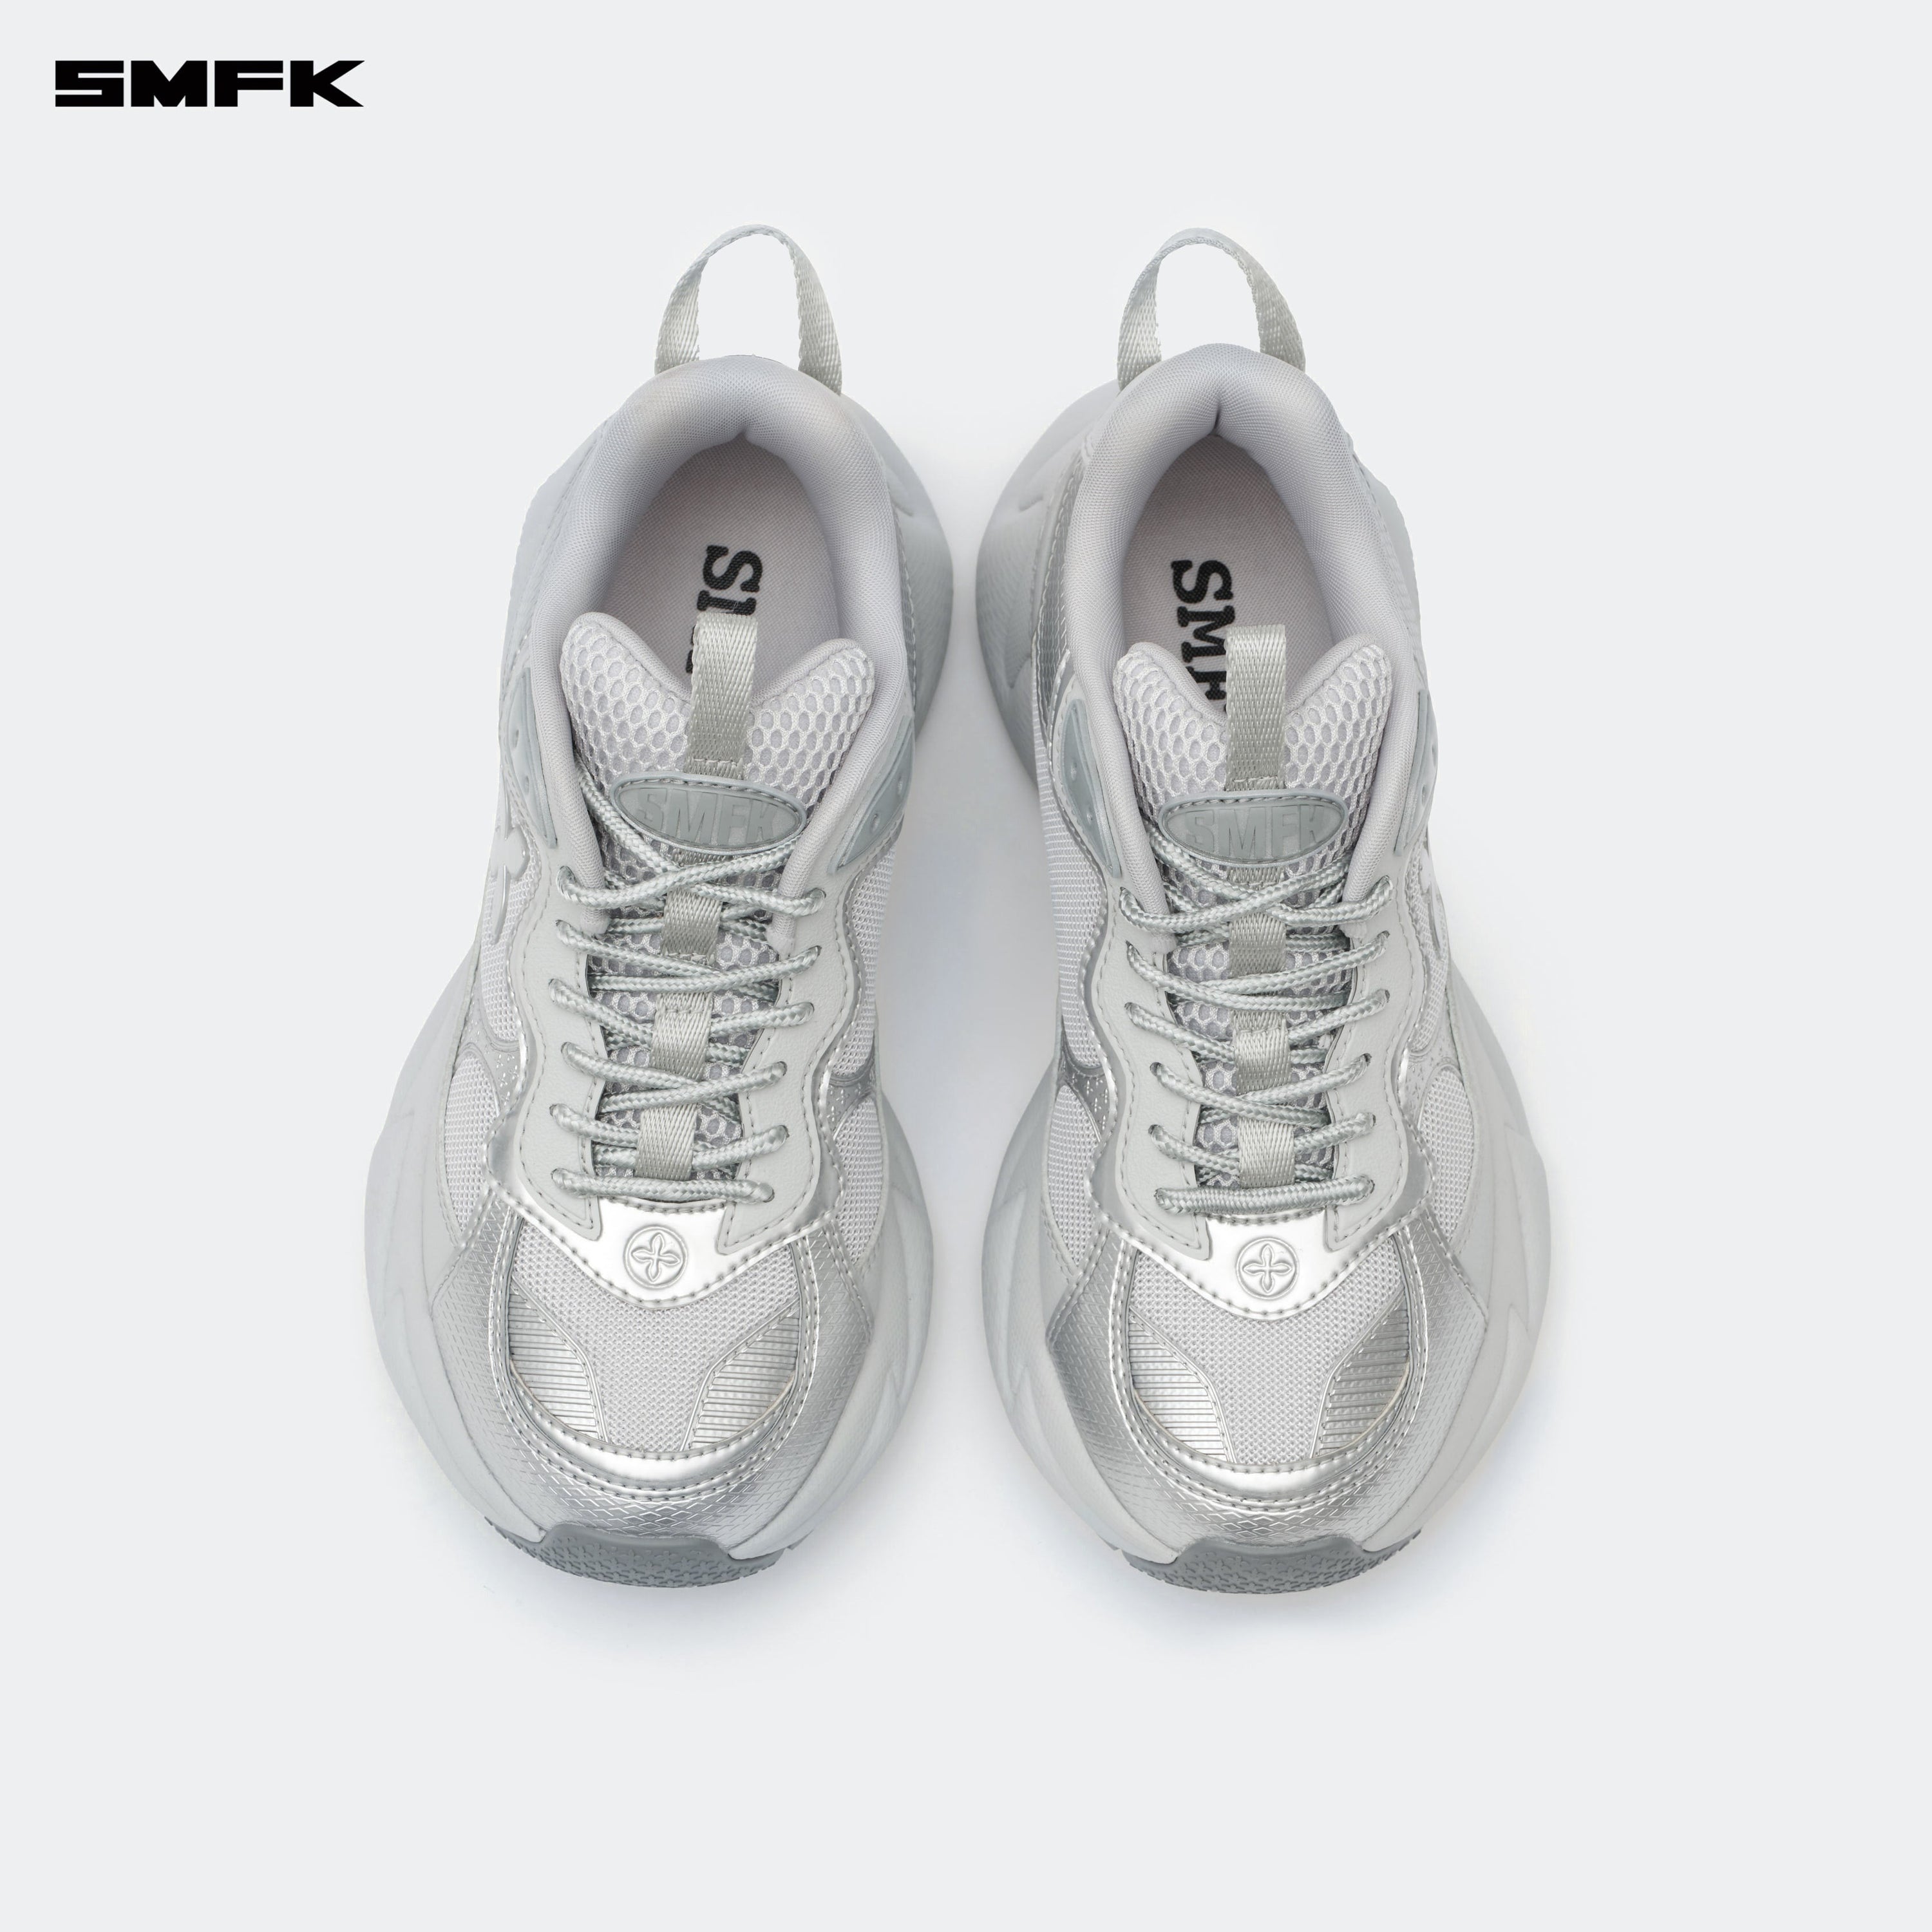 COMPASS WAVE Retro Jogging Shoes In Gray - SMFK Official